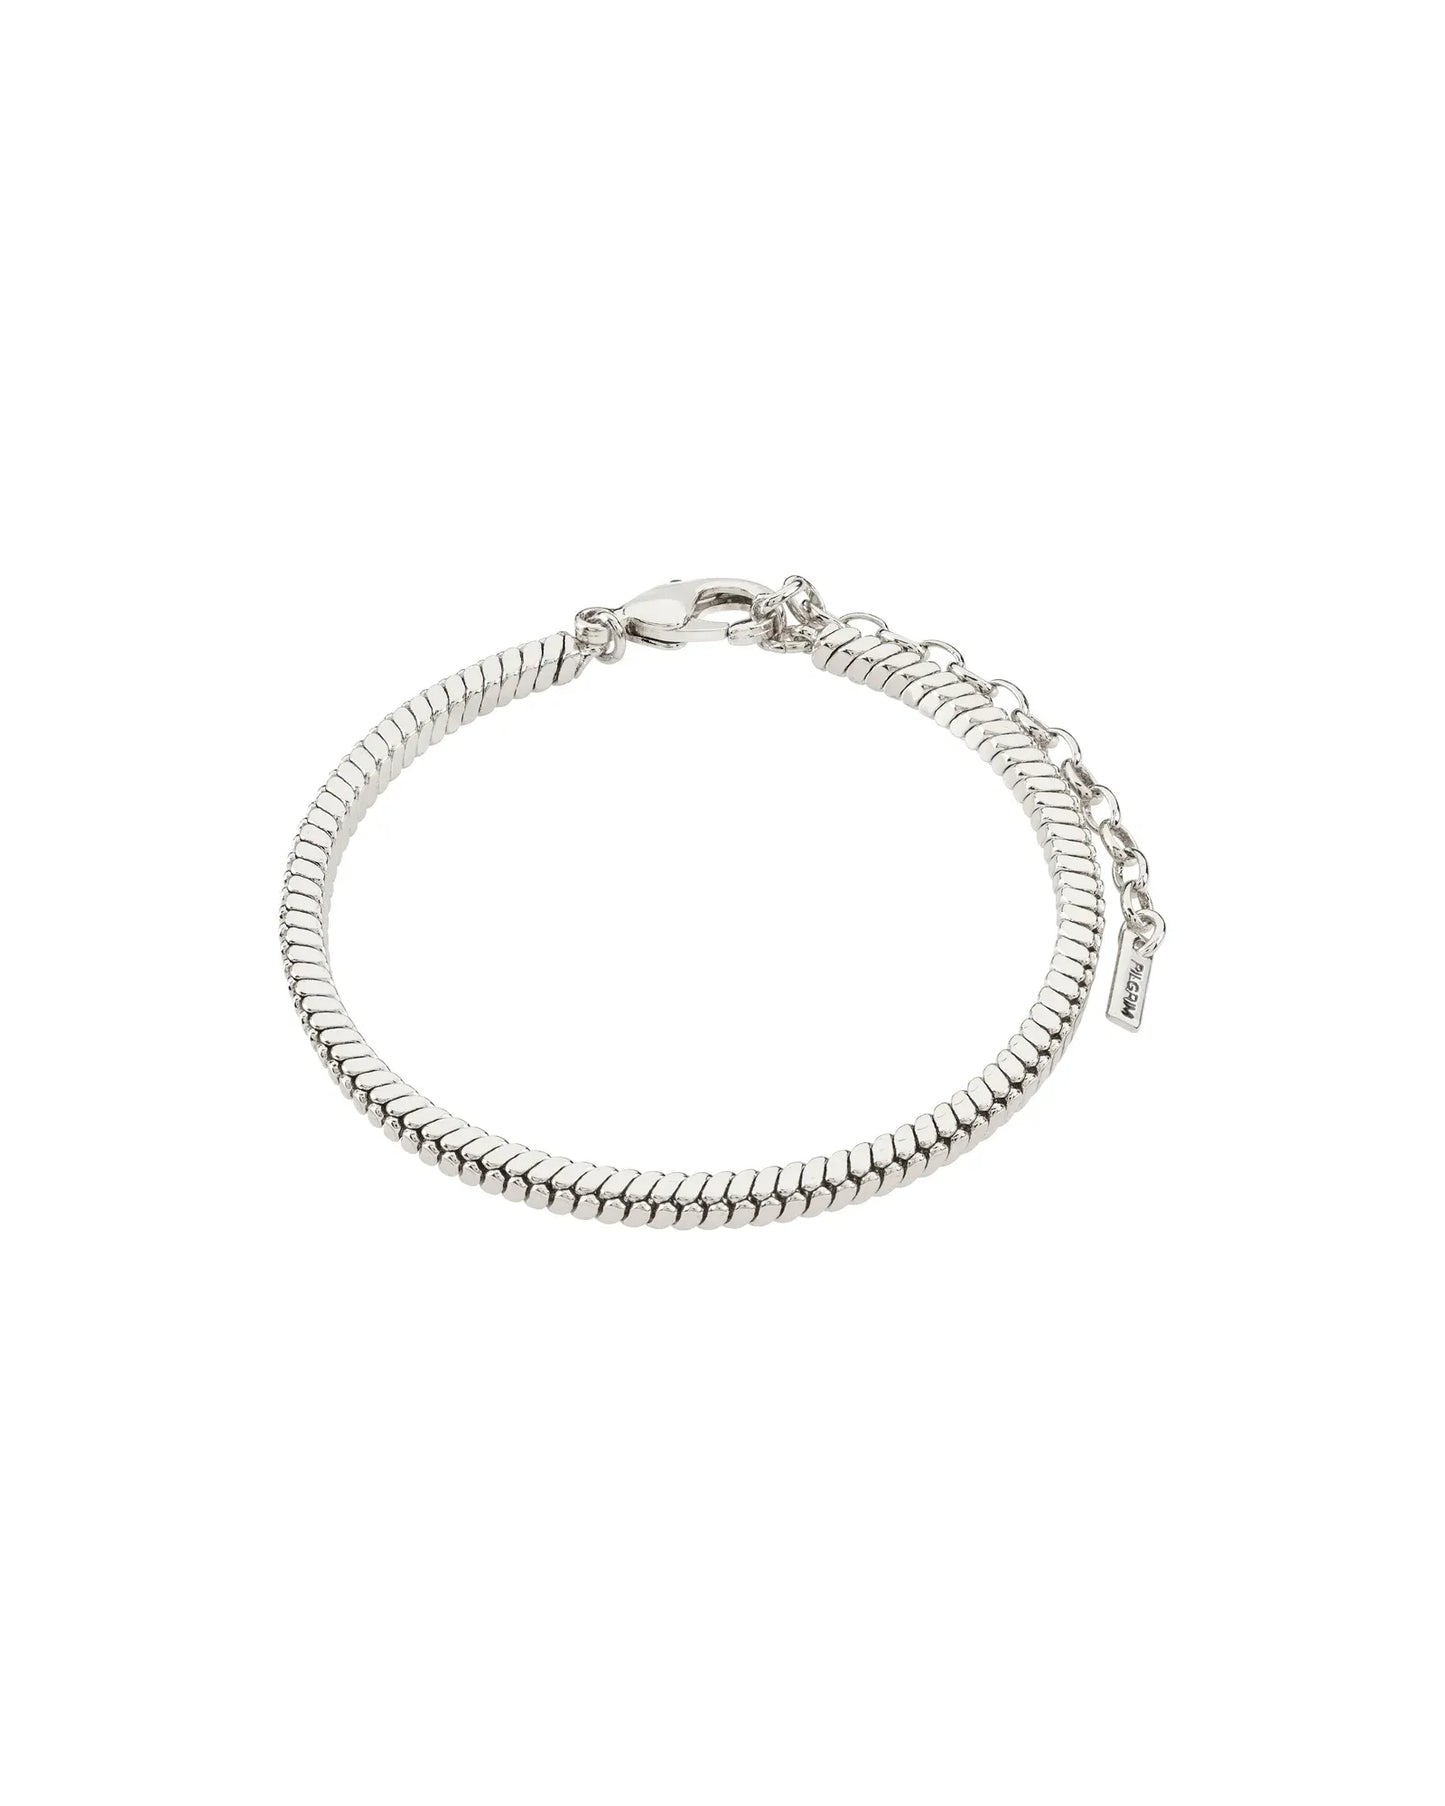 DOMINIQUE Recycled Bracelet - Silver Plated